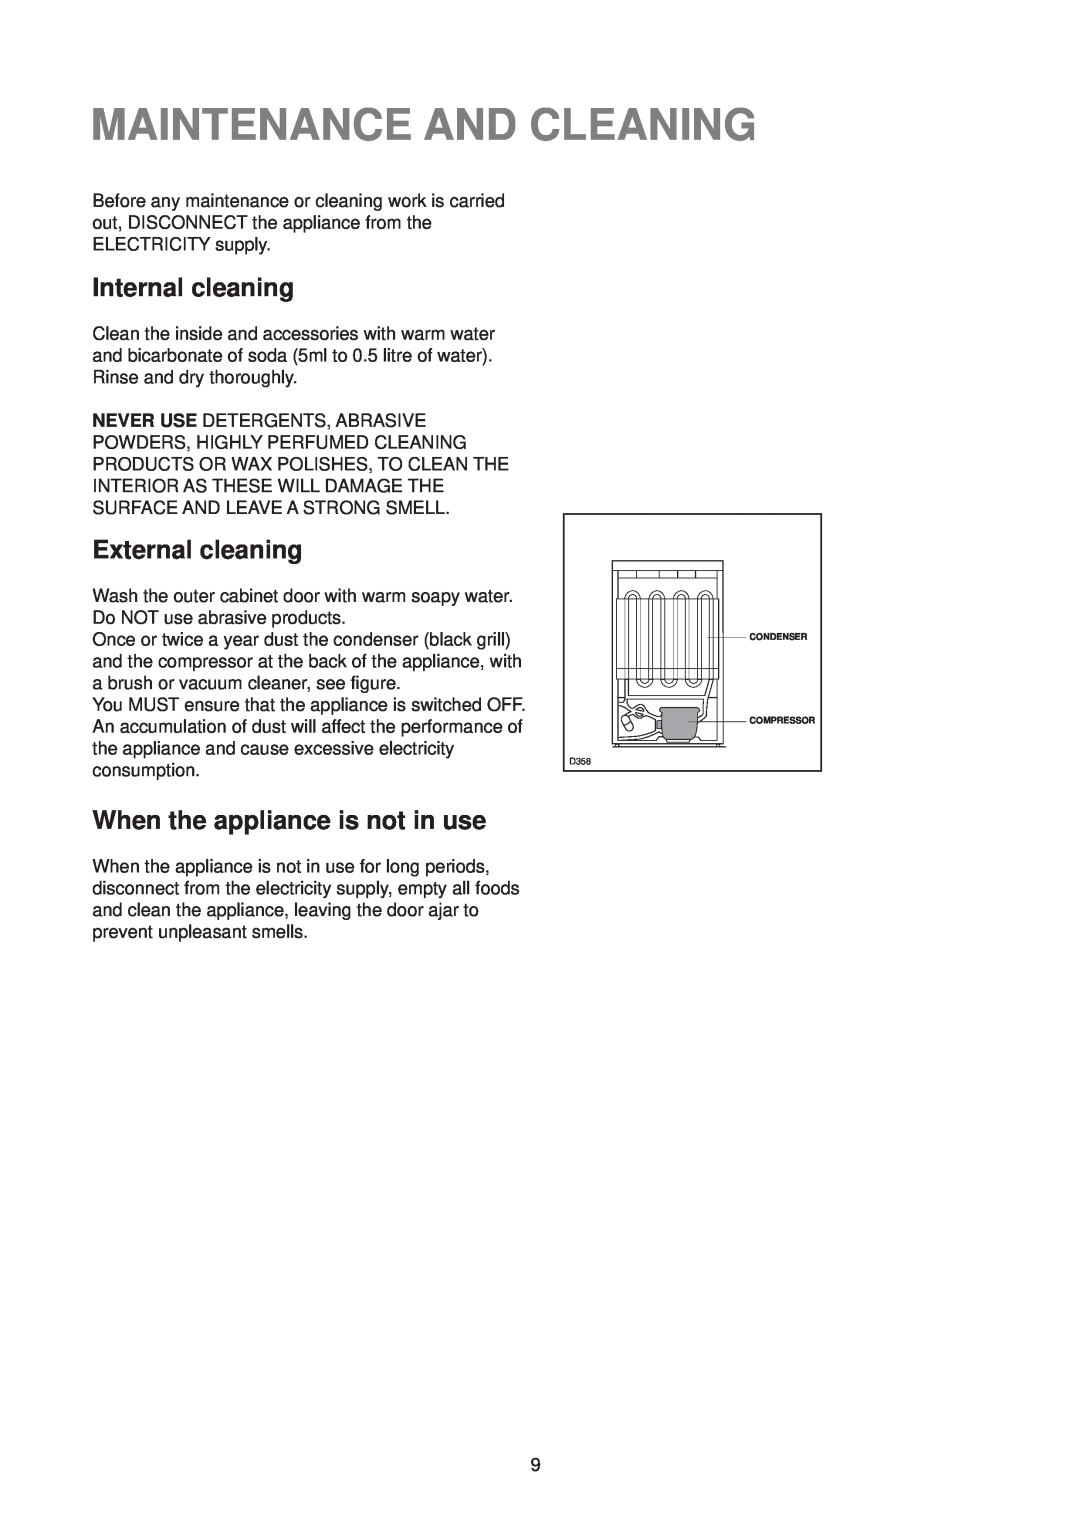 Electrolux EU 6321 manual Maintenance And Cleaning, Internal cleaning, External cleaning, When the appliance is not in use 